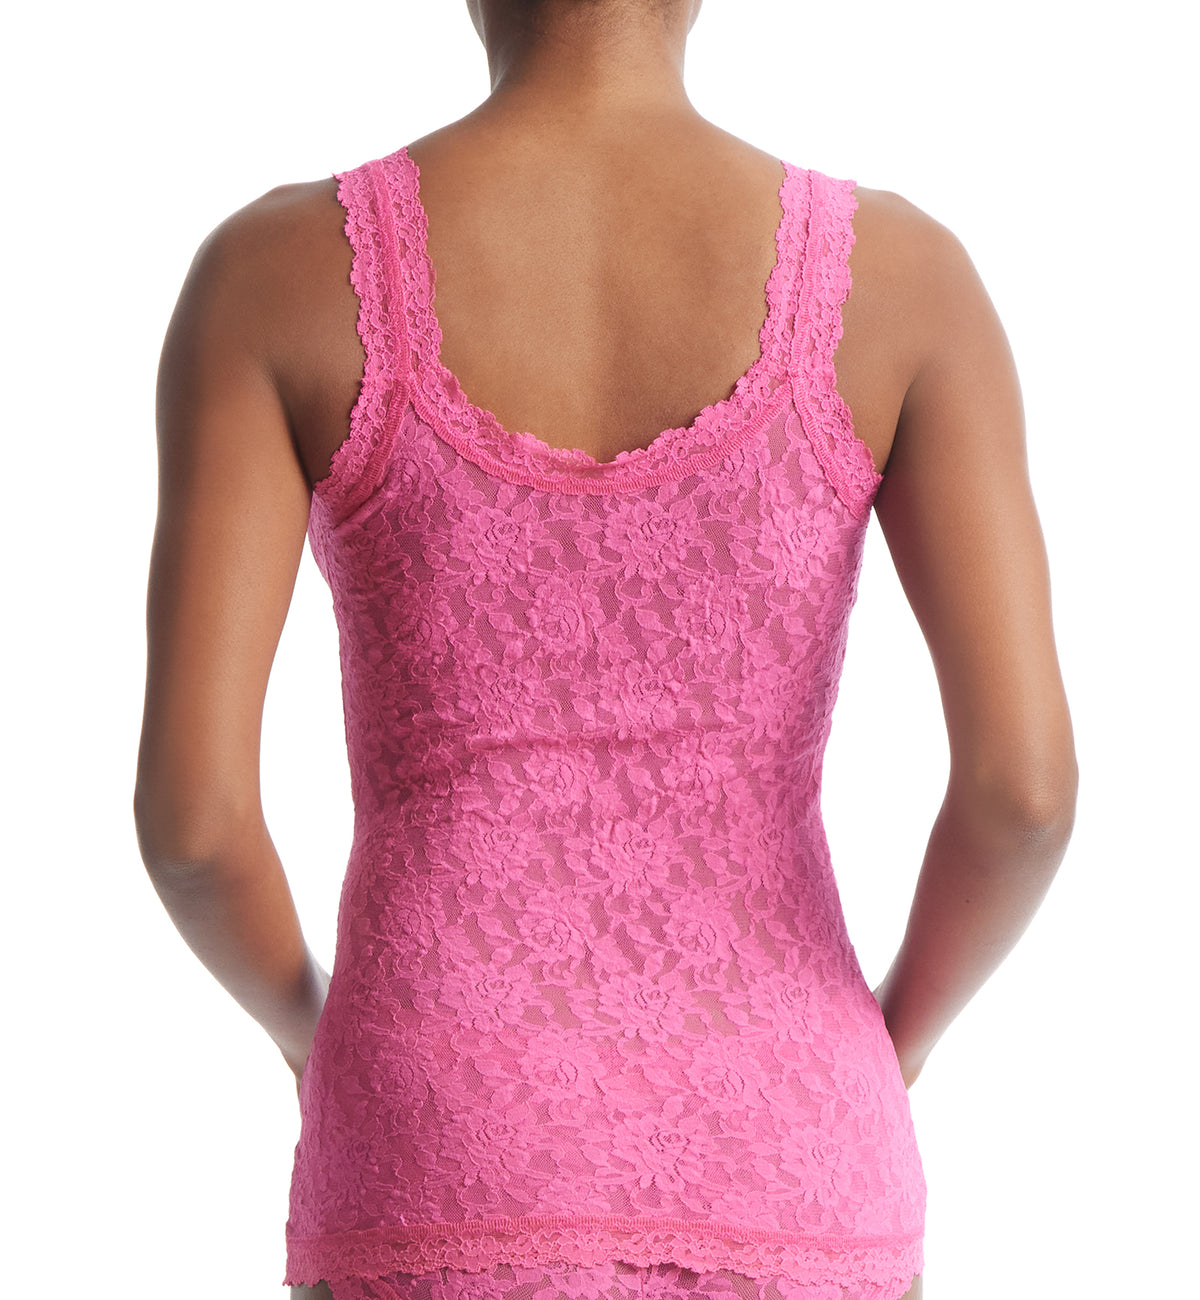 Hanky Panky Signature Lace Unlined Camisole (1390LP),XS,Intuition - Intuition,XS